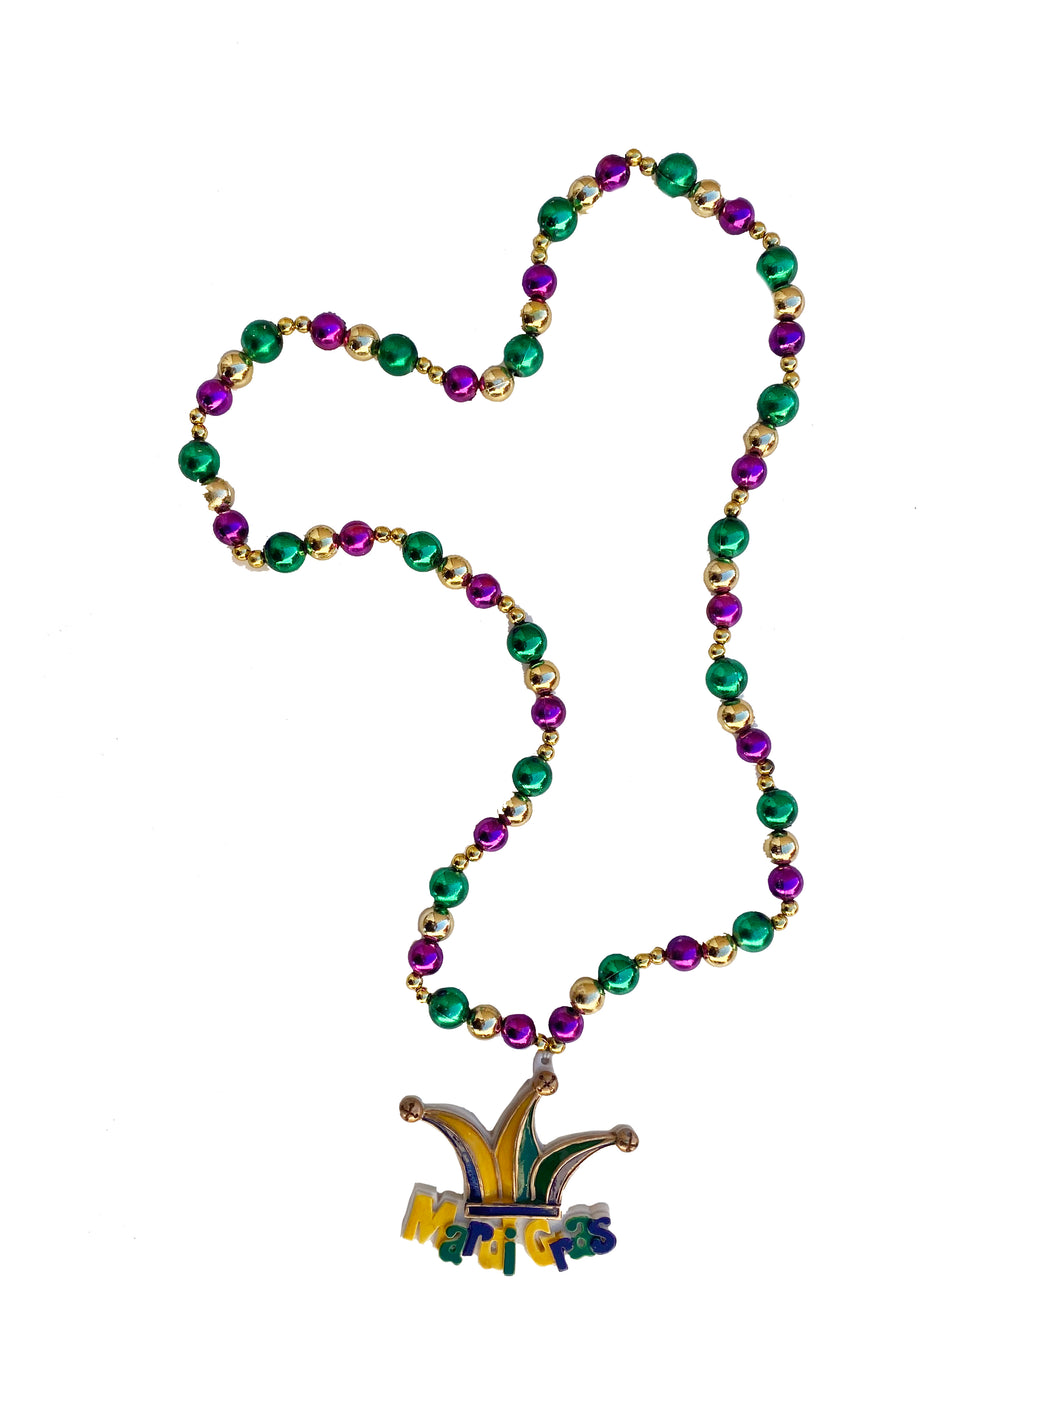 Mardi Gras Jester Hat on Purple, Green, and Gold Specialty Bead